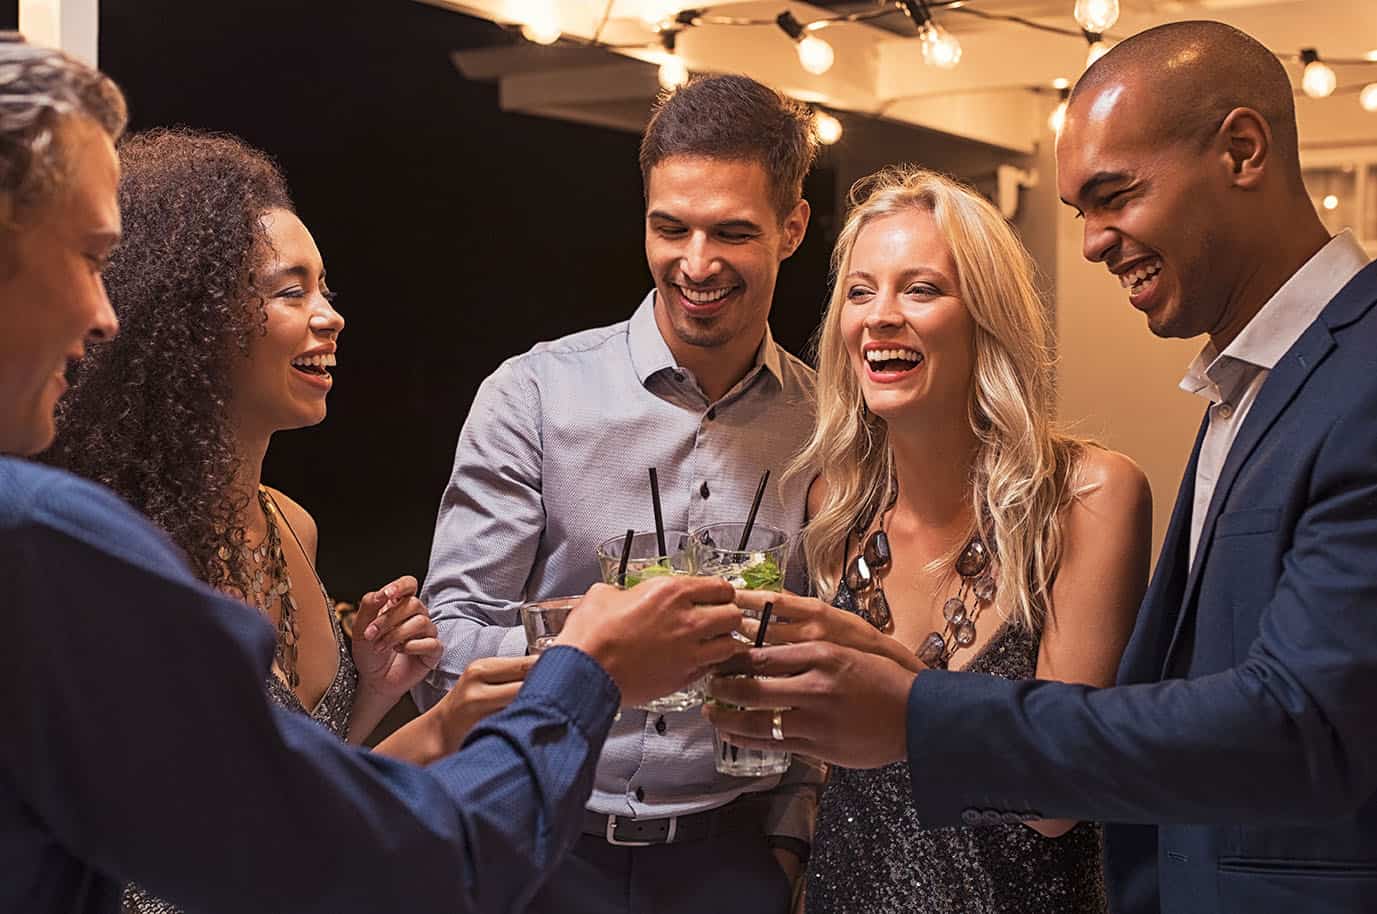 Group of young multiethnic friends enjoying evening and drinking cocktails. Happy men and women raising a toast with mojito on a patio under the light bulb wire. Elegant girls and stylish guy having fun together at party night.